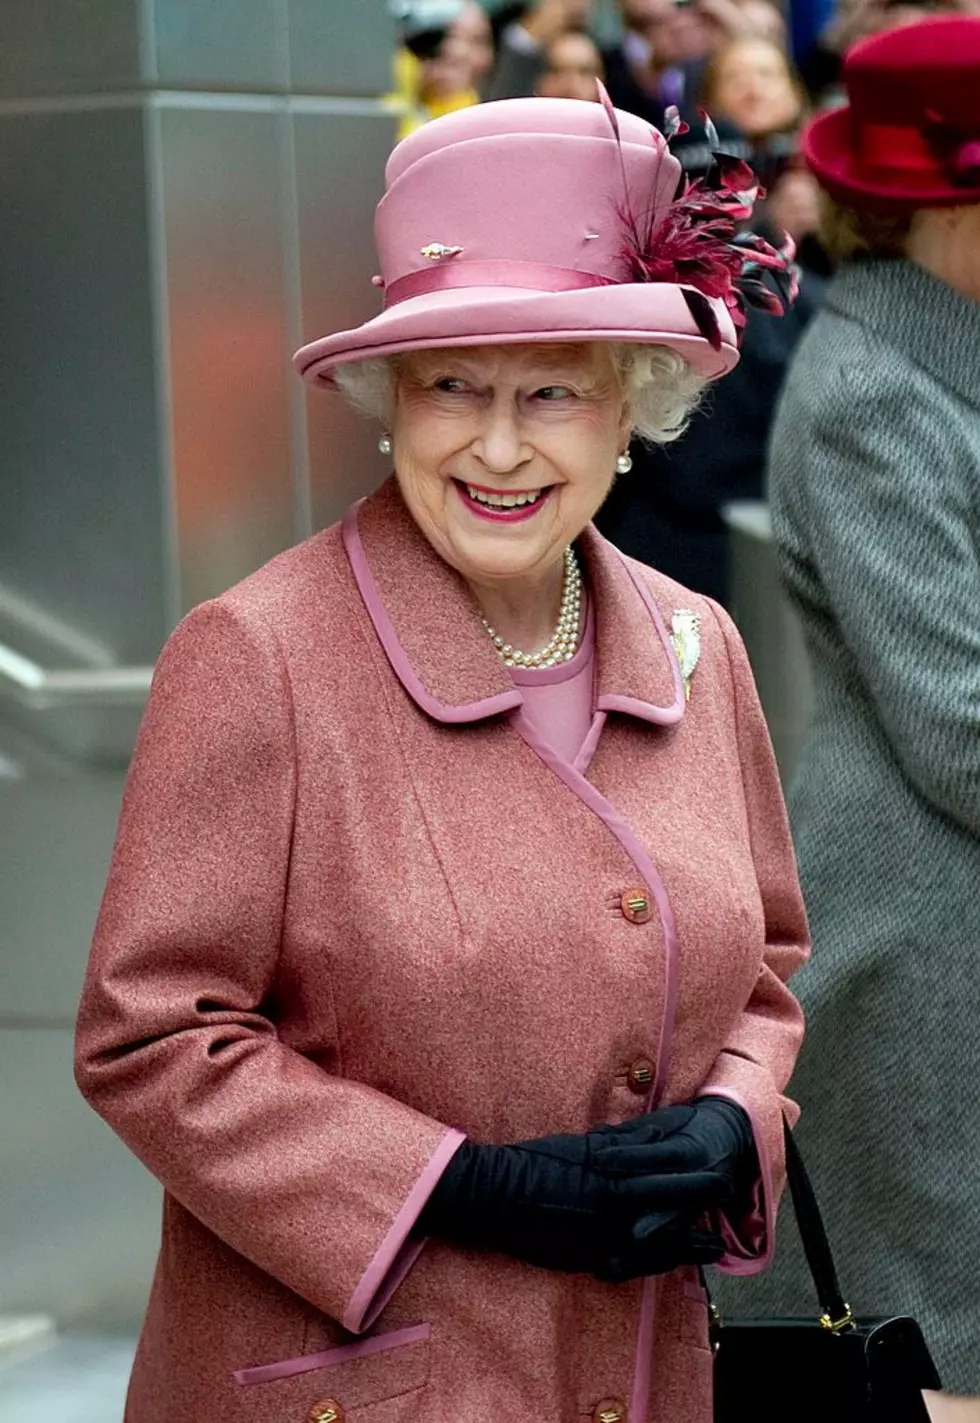 Queen Elizabeth II Dead at 96 After 70 Years on the Throne